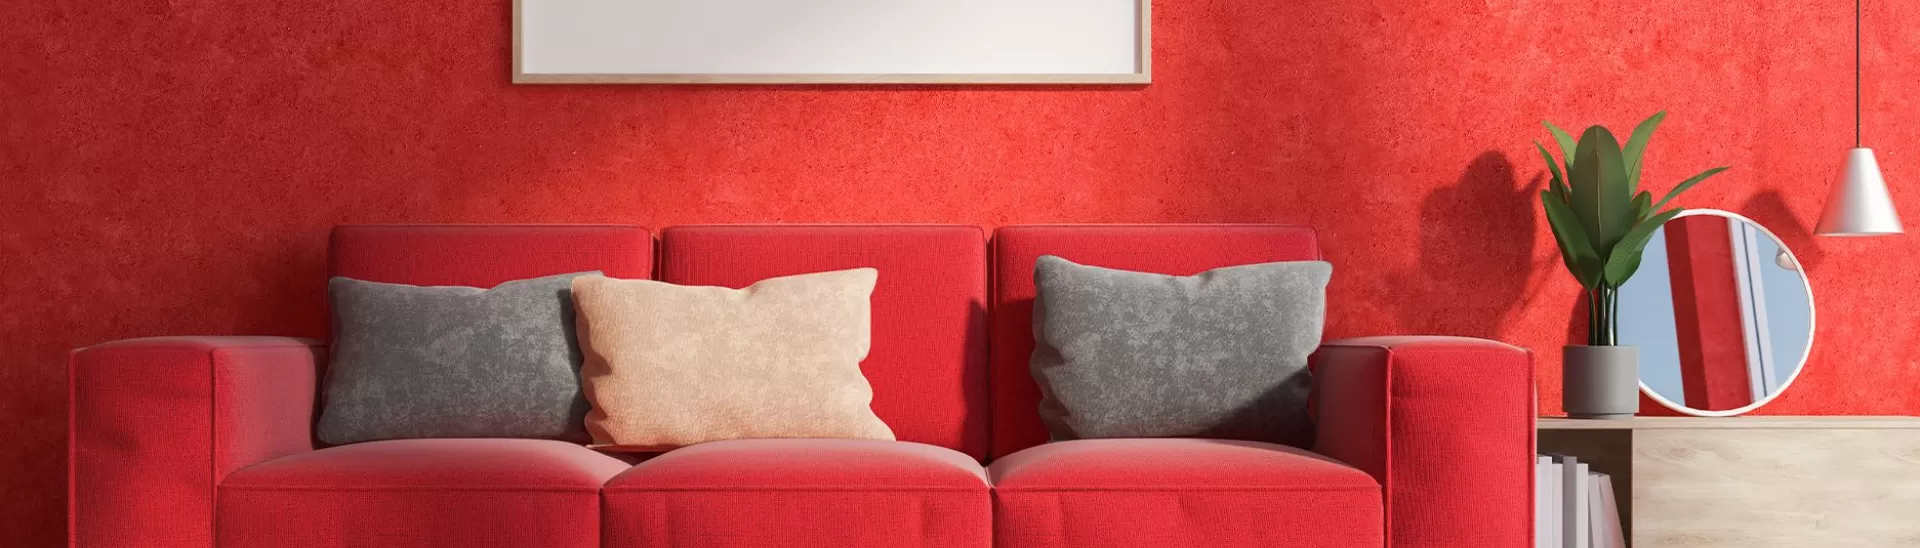 5 Red Wall Paint Colour Shades for Your Home - Nerolac